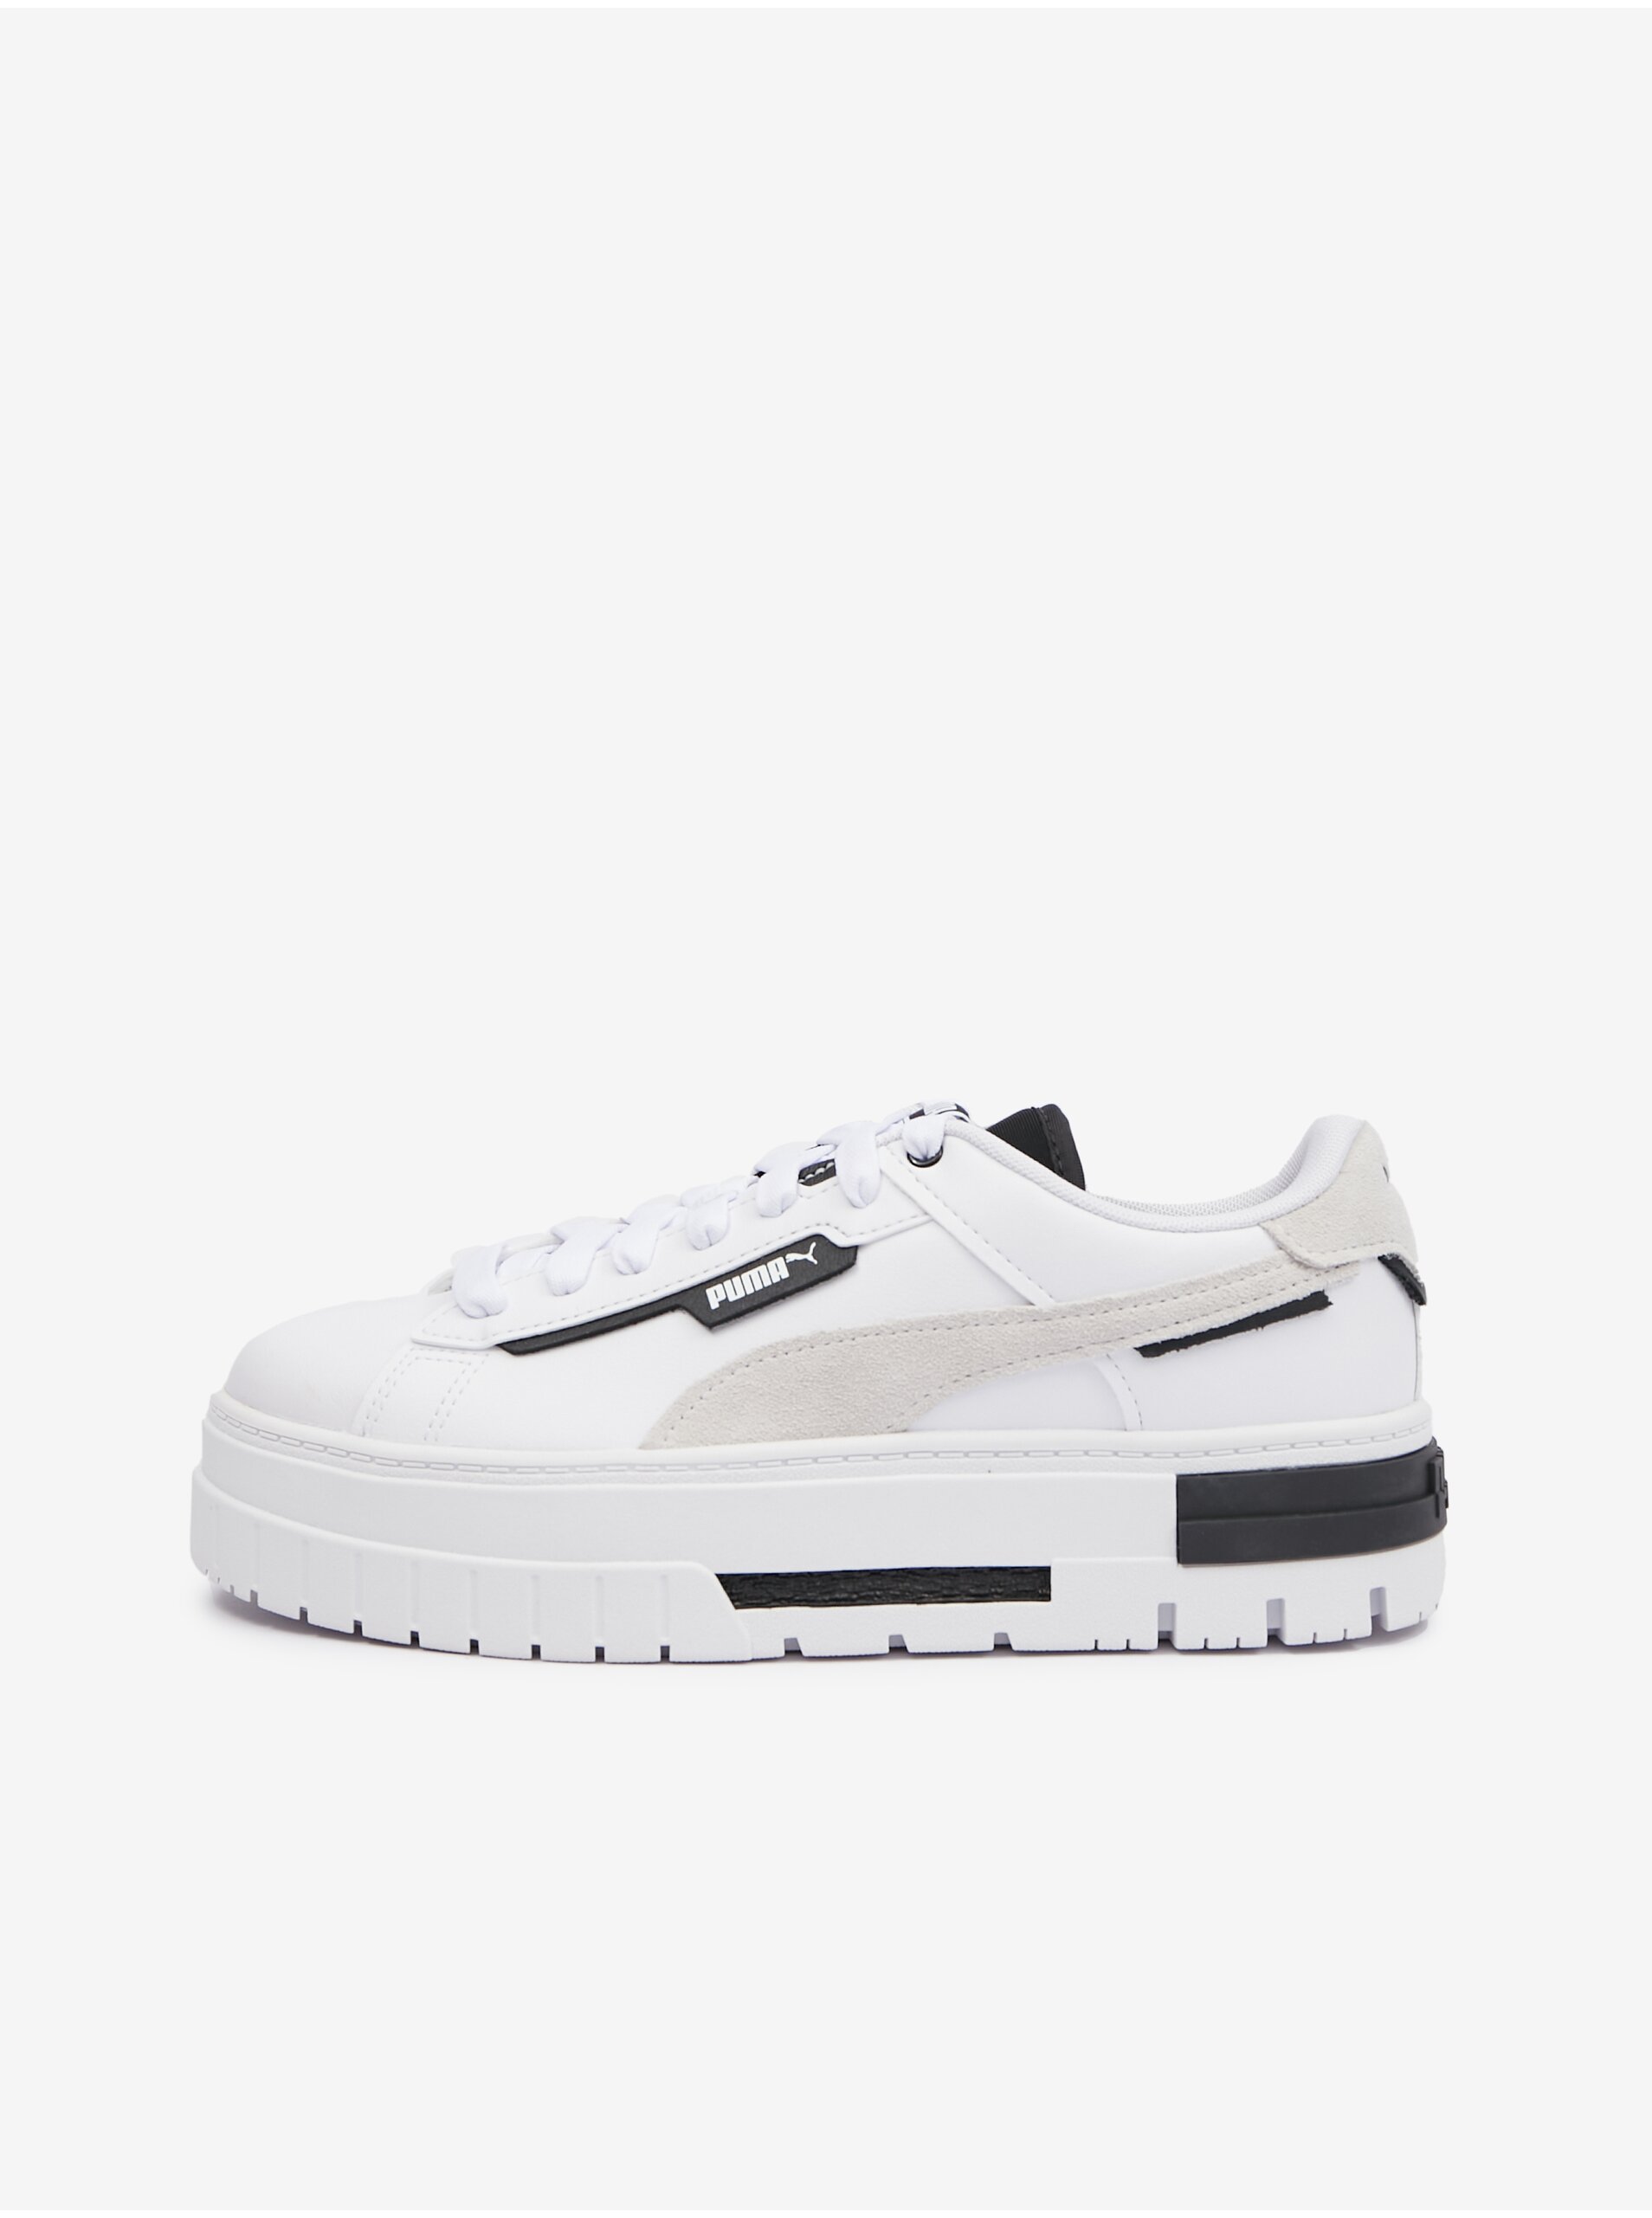 White Women's Sneakers with Leather Detailing Puma Mayze Crashed Wns - Women